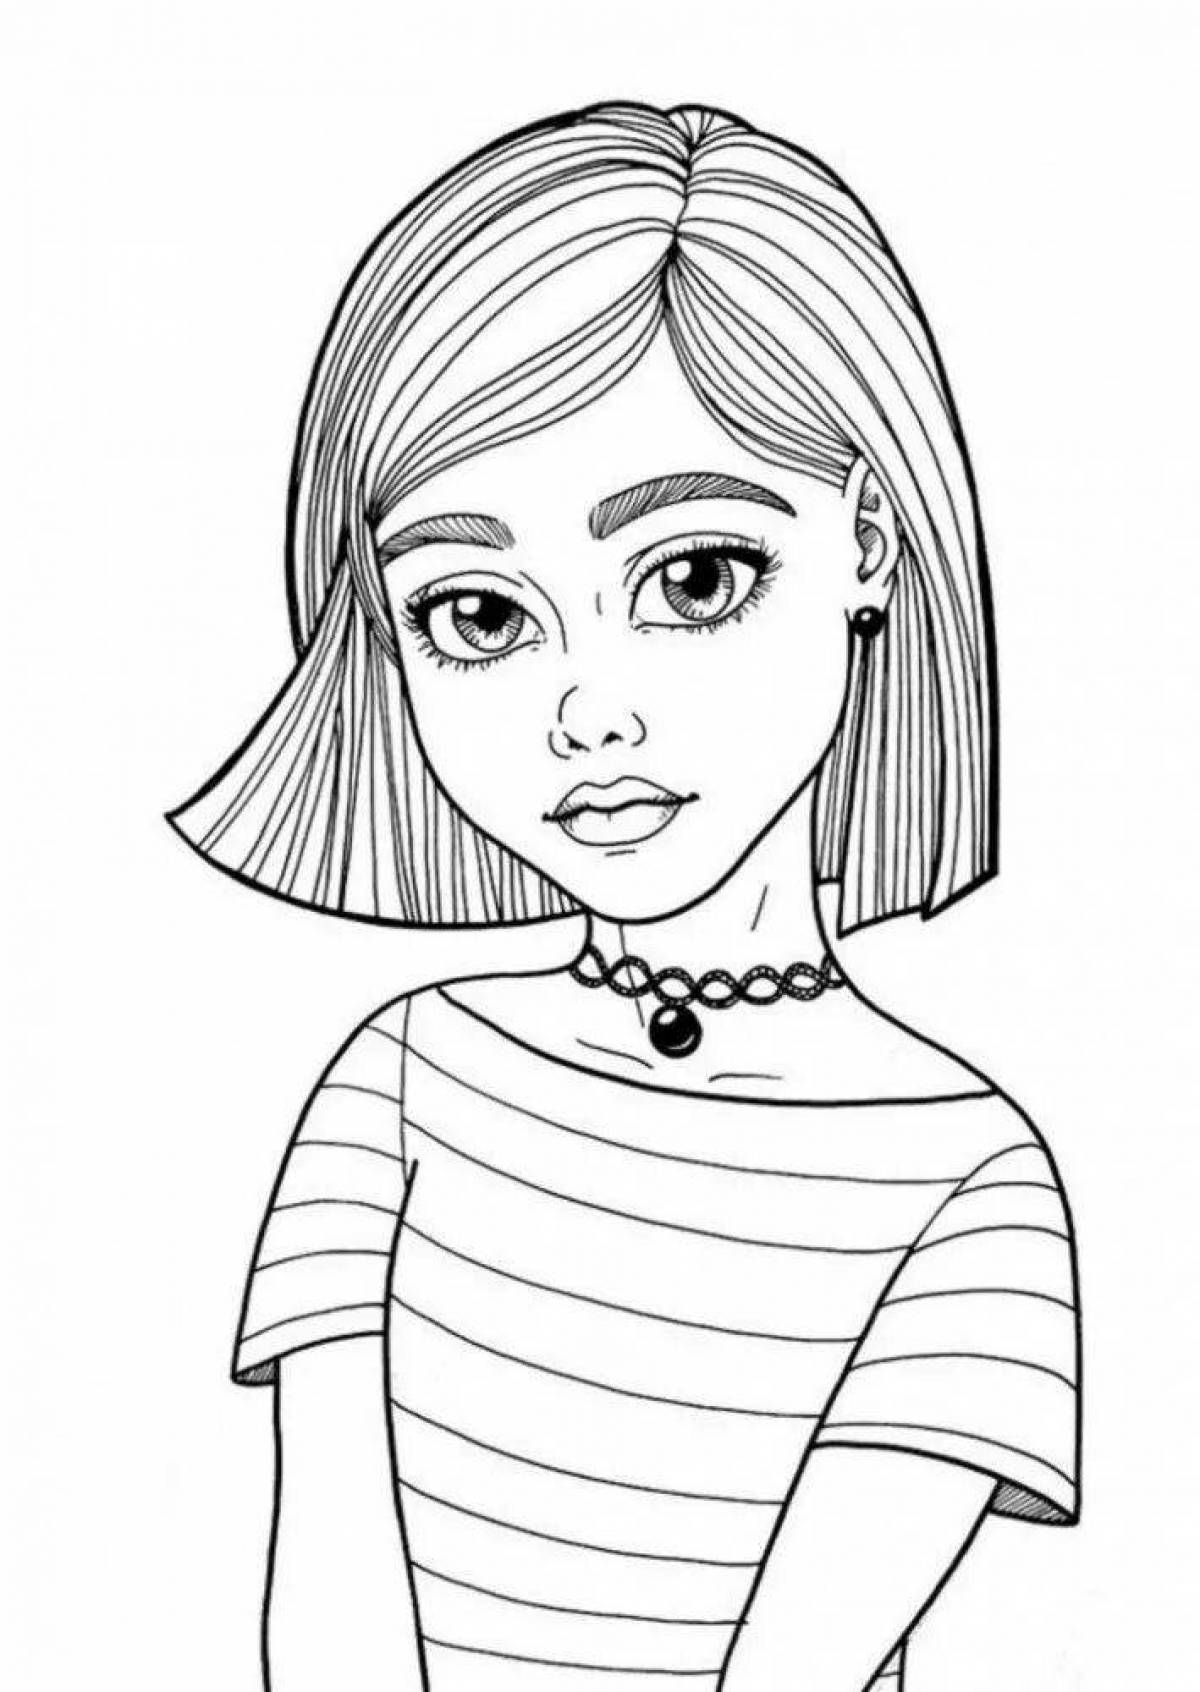 Glowing coloring pages for girls 15-16 years old